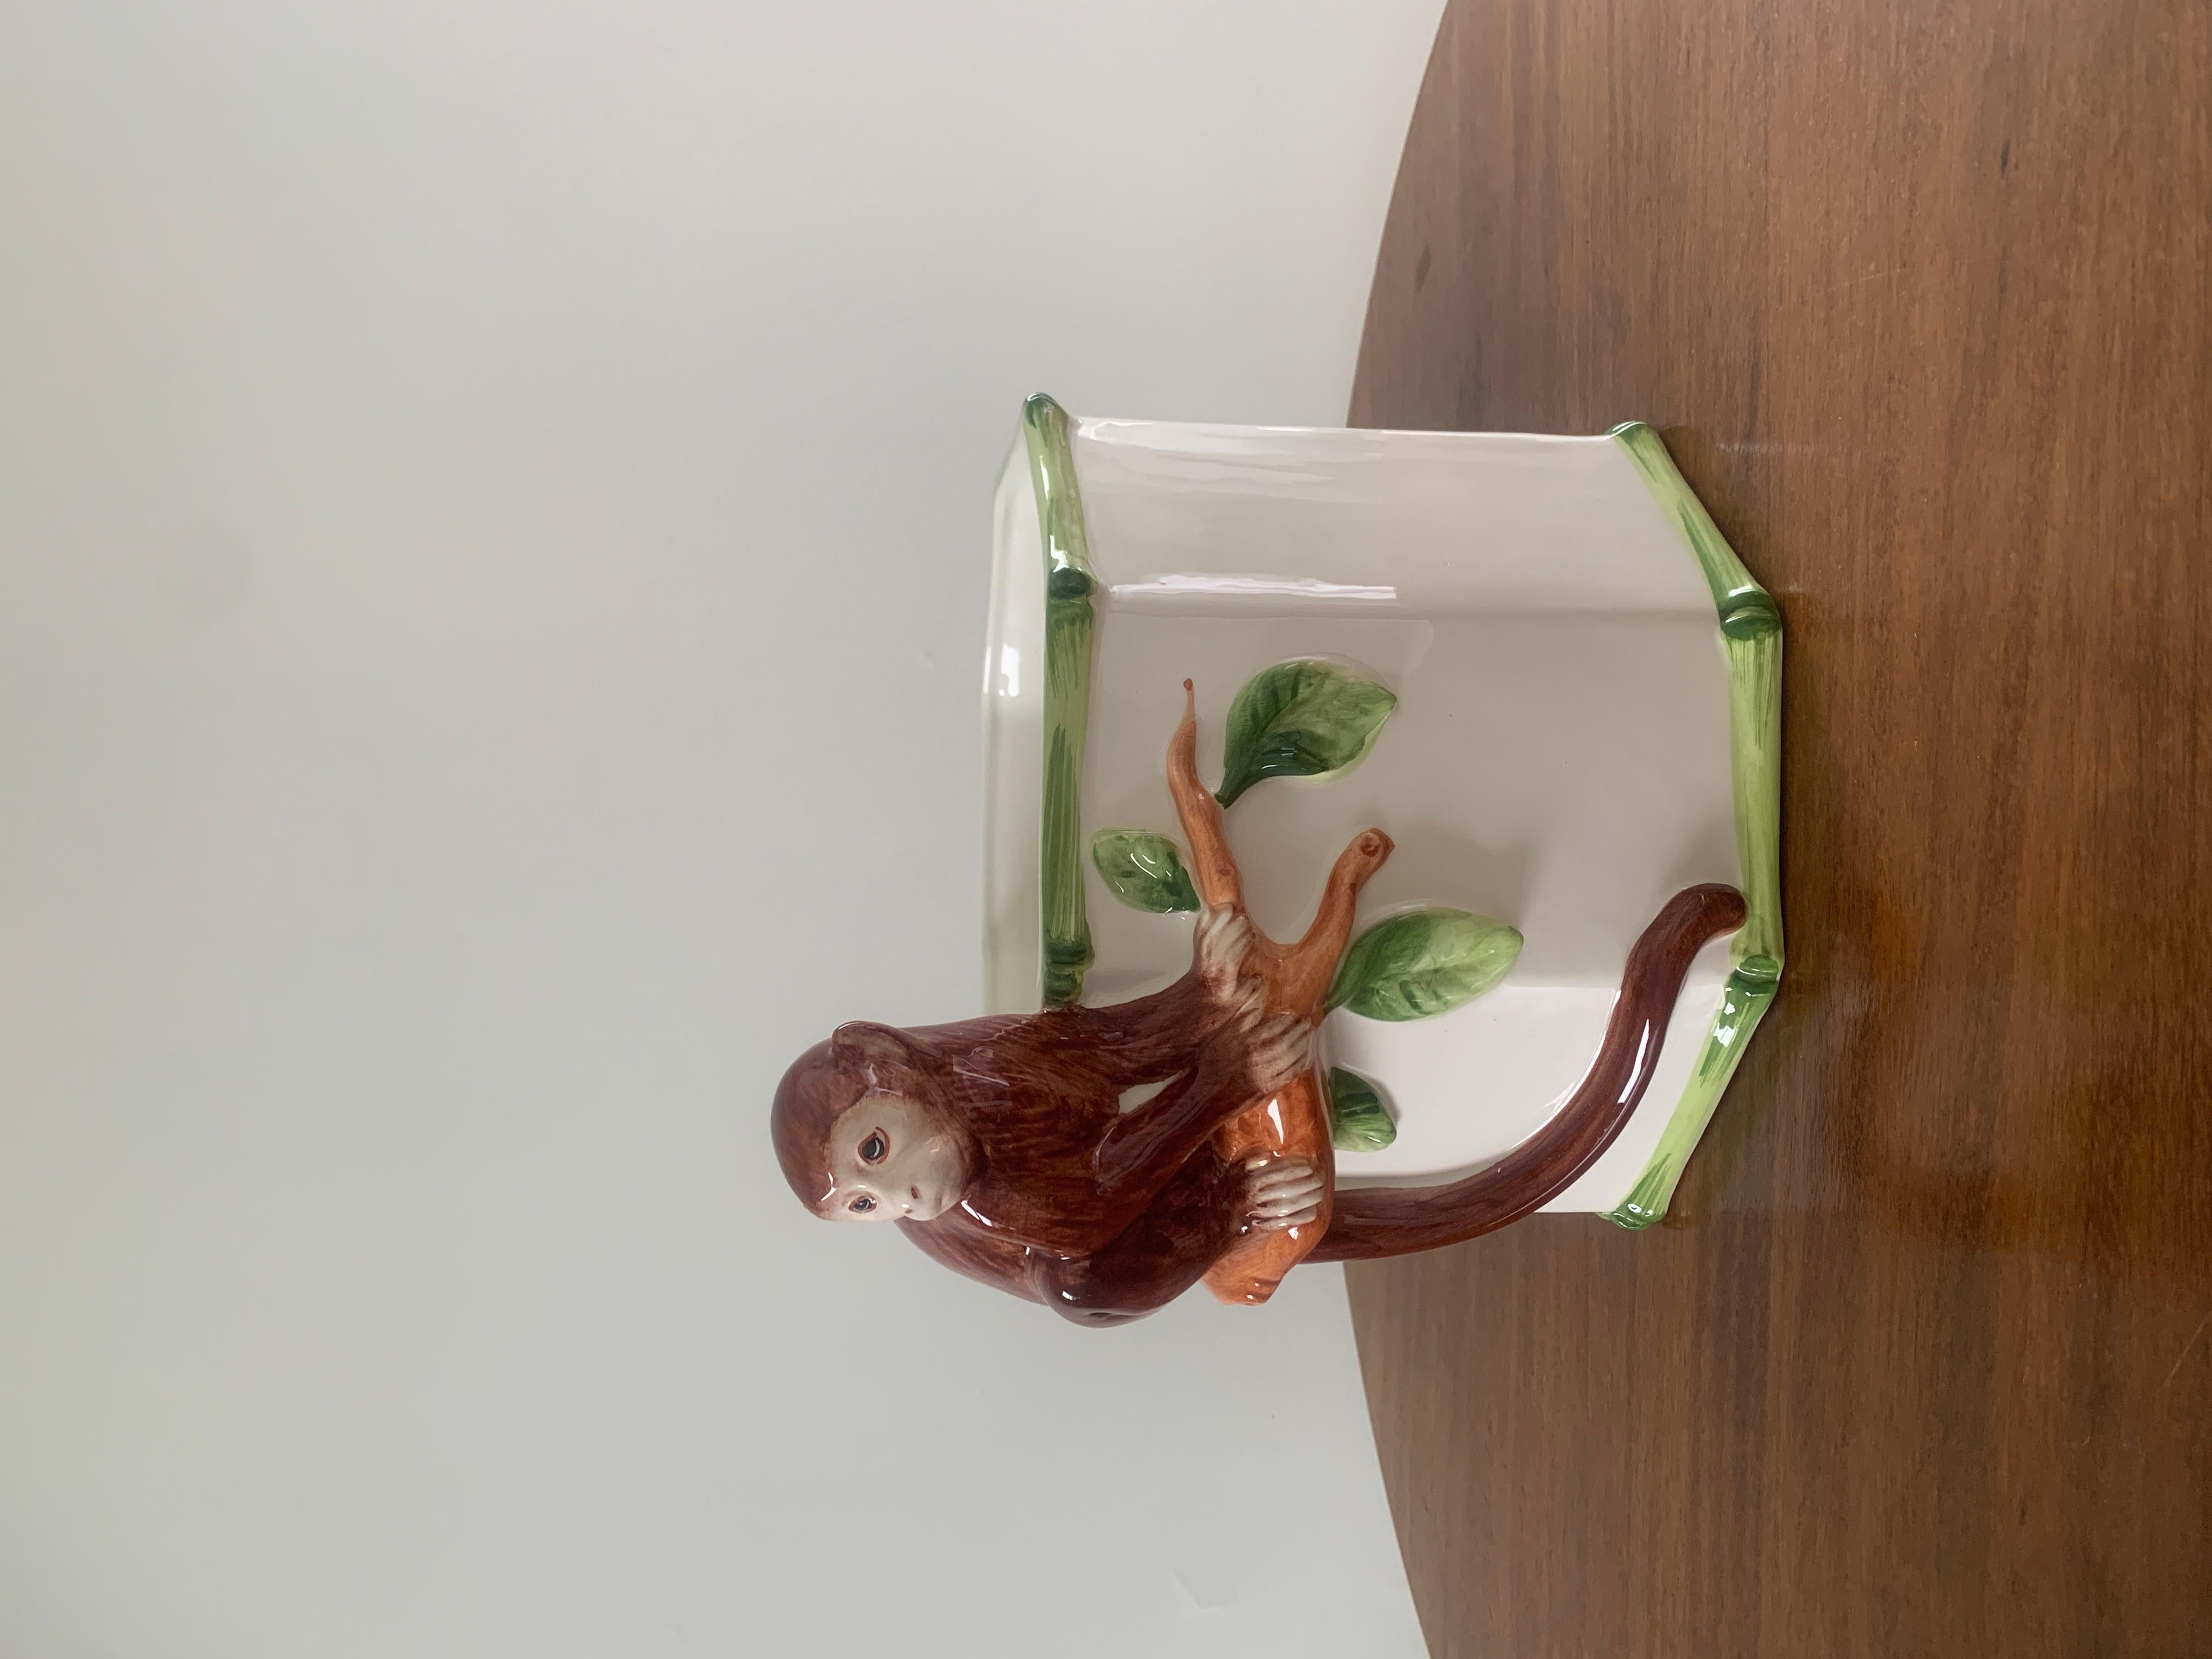 An outstanding Mid-Century Chinoiserie porcelain cachepot planter with a monkey and bamboo

Italy, Mid-20th Century 

Hand painted porcelain

Measures: 11